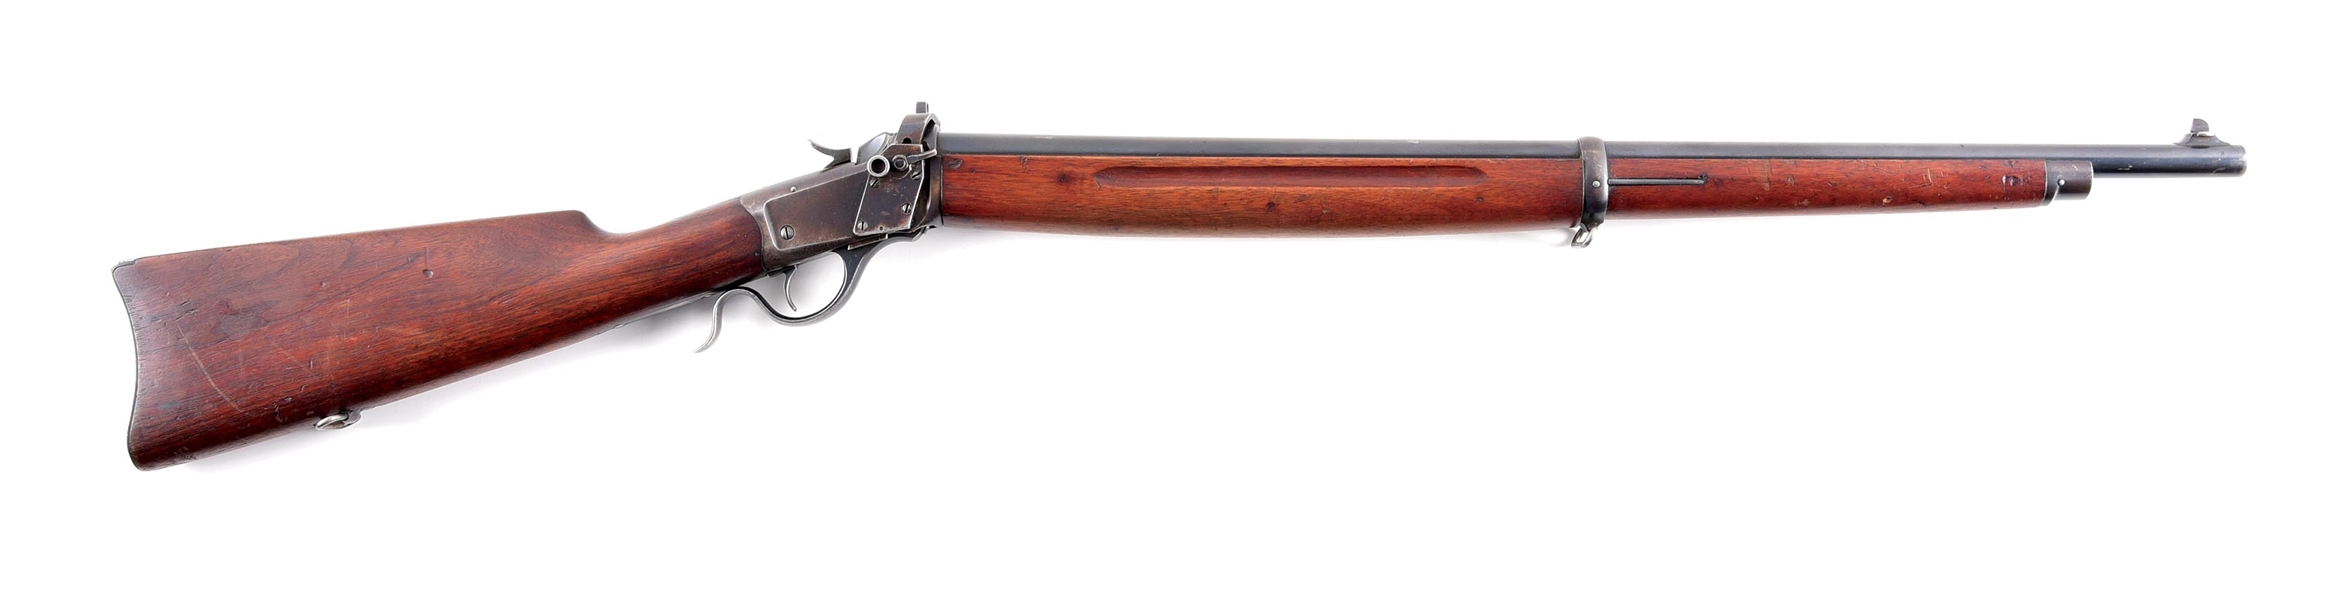 (C) US MARKED WINCHESTER 1885 LO- WALL .22 TRAINING RIFLE.